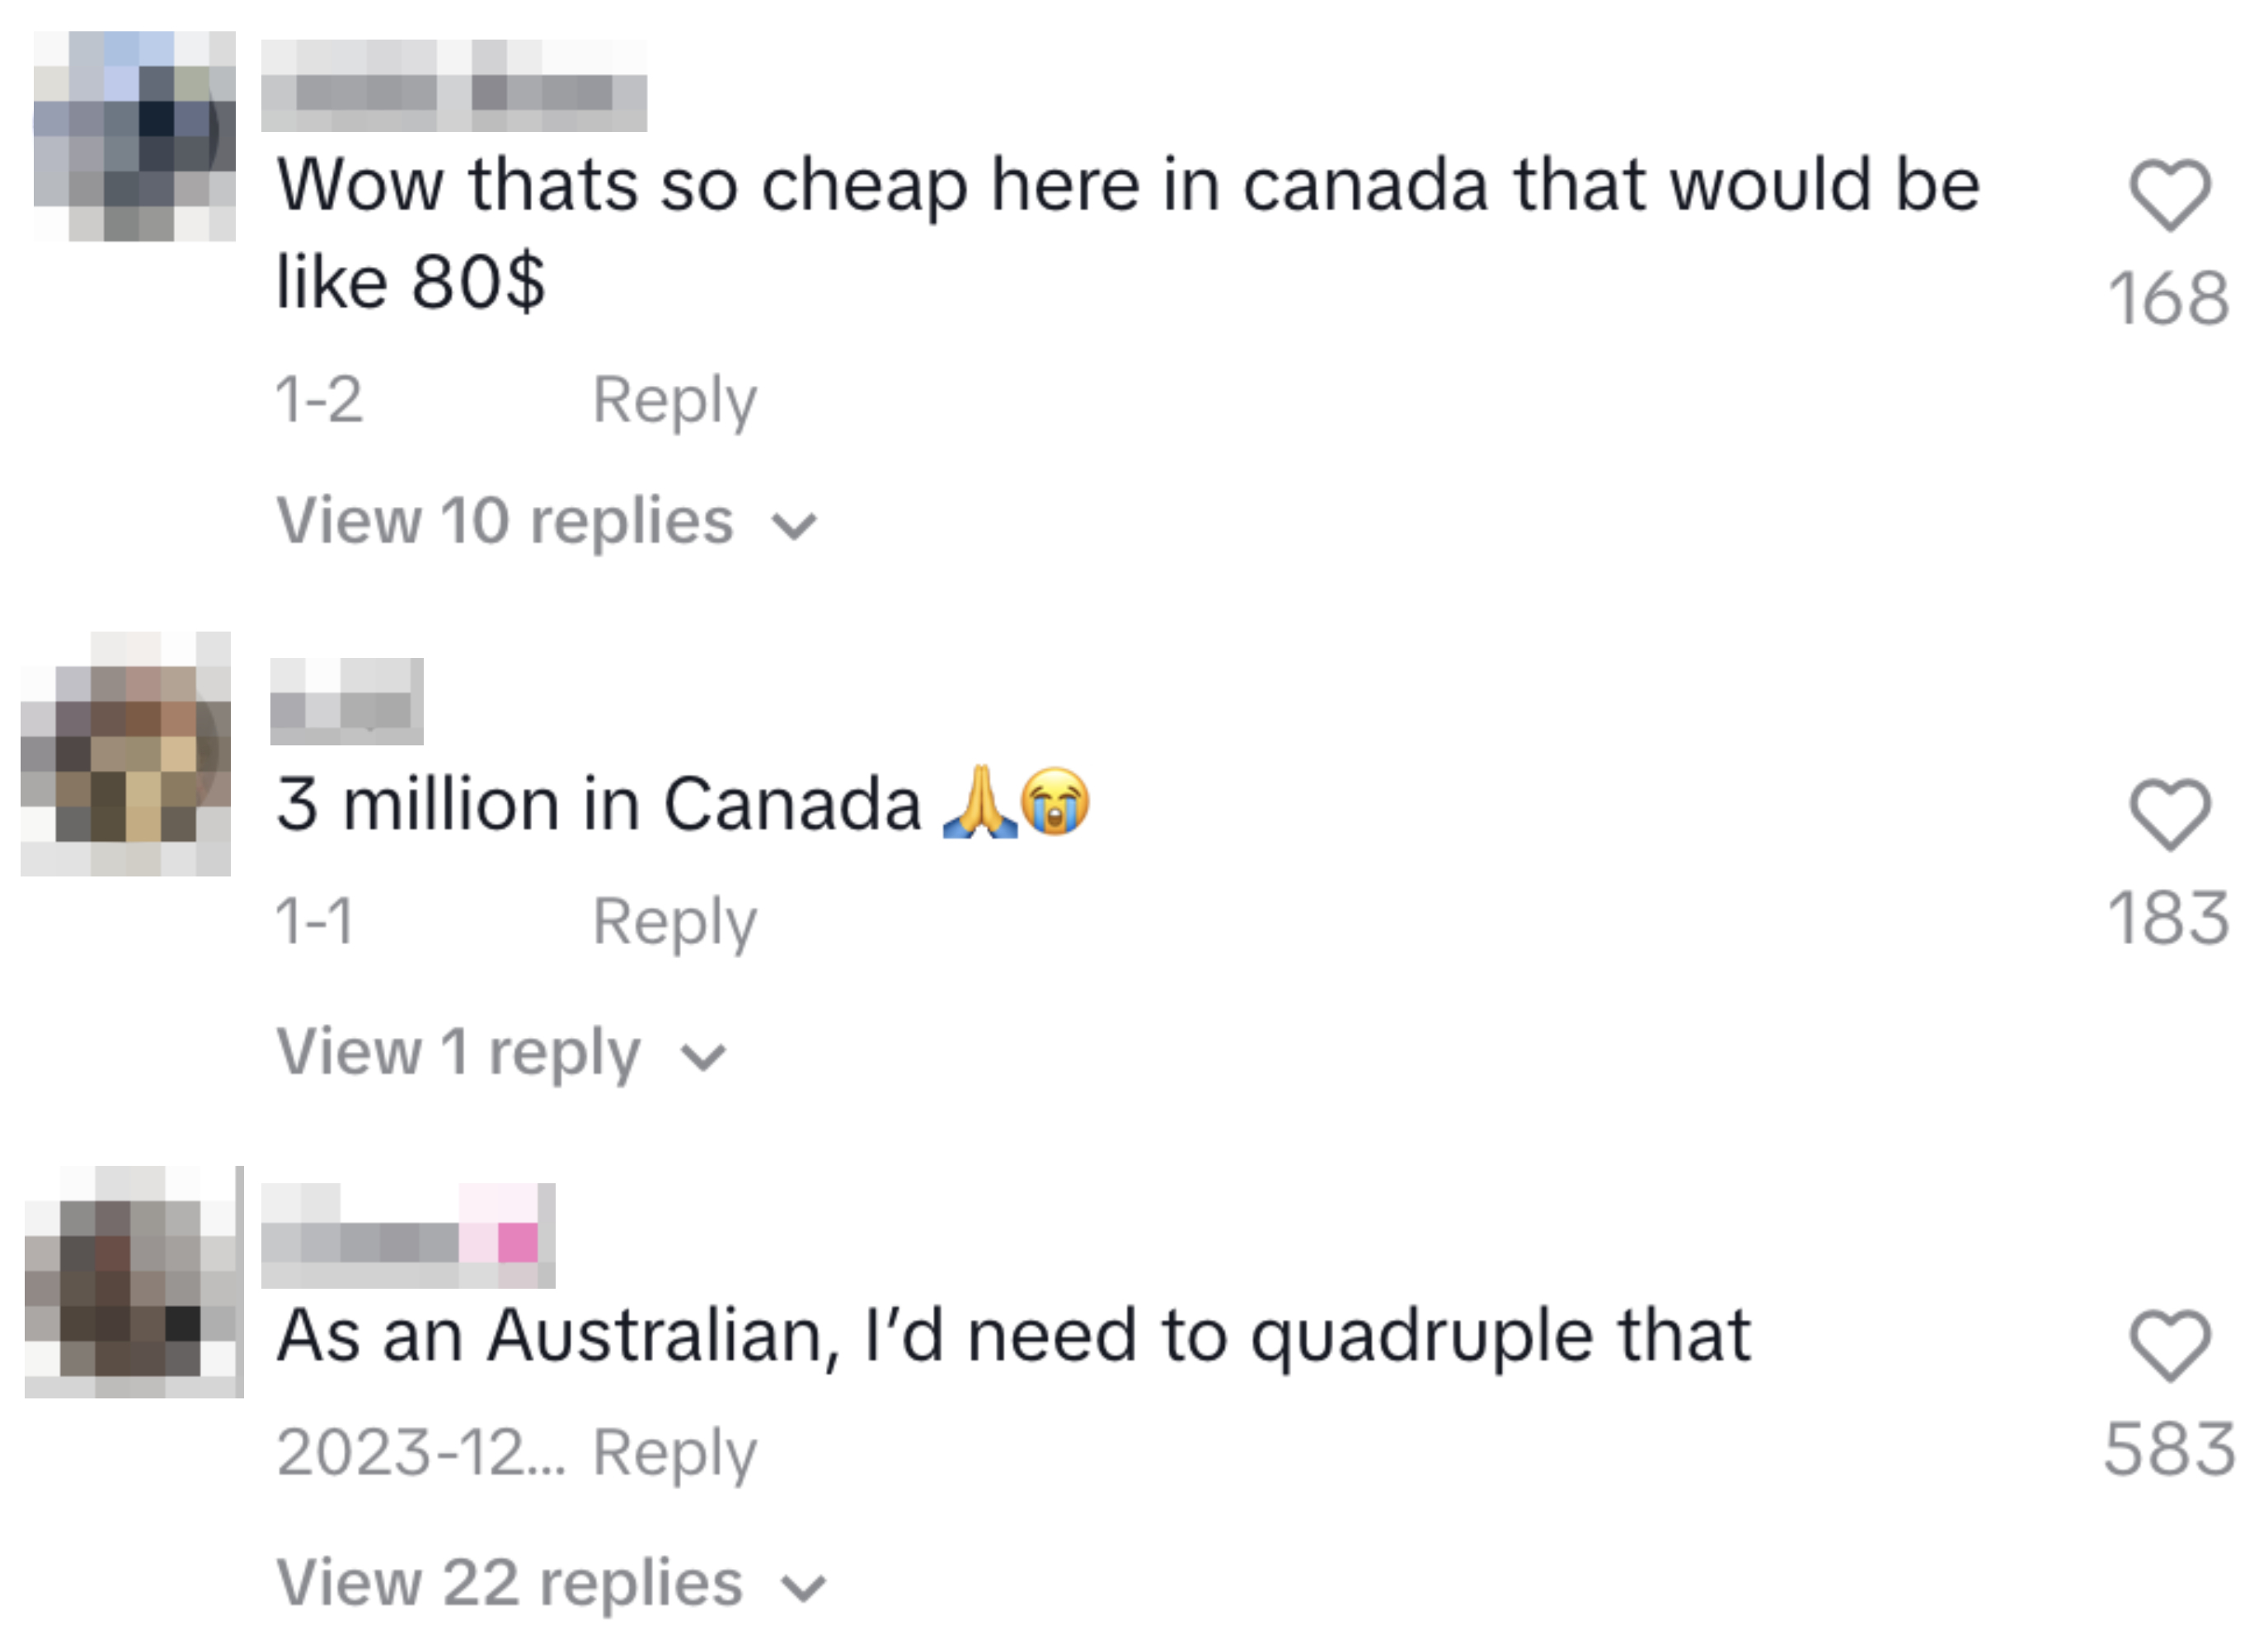 Comments on Maria&#x27;s TikTok: &quot;Wow thats so cheap here in canada that would be like 80$,&quot; &quot;3 million in Canada,&quot; &quot;As an Australian, I&#x27;d need to quadruple that&quot;